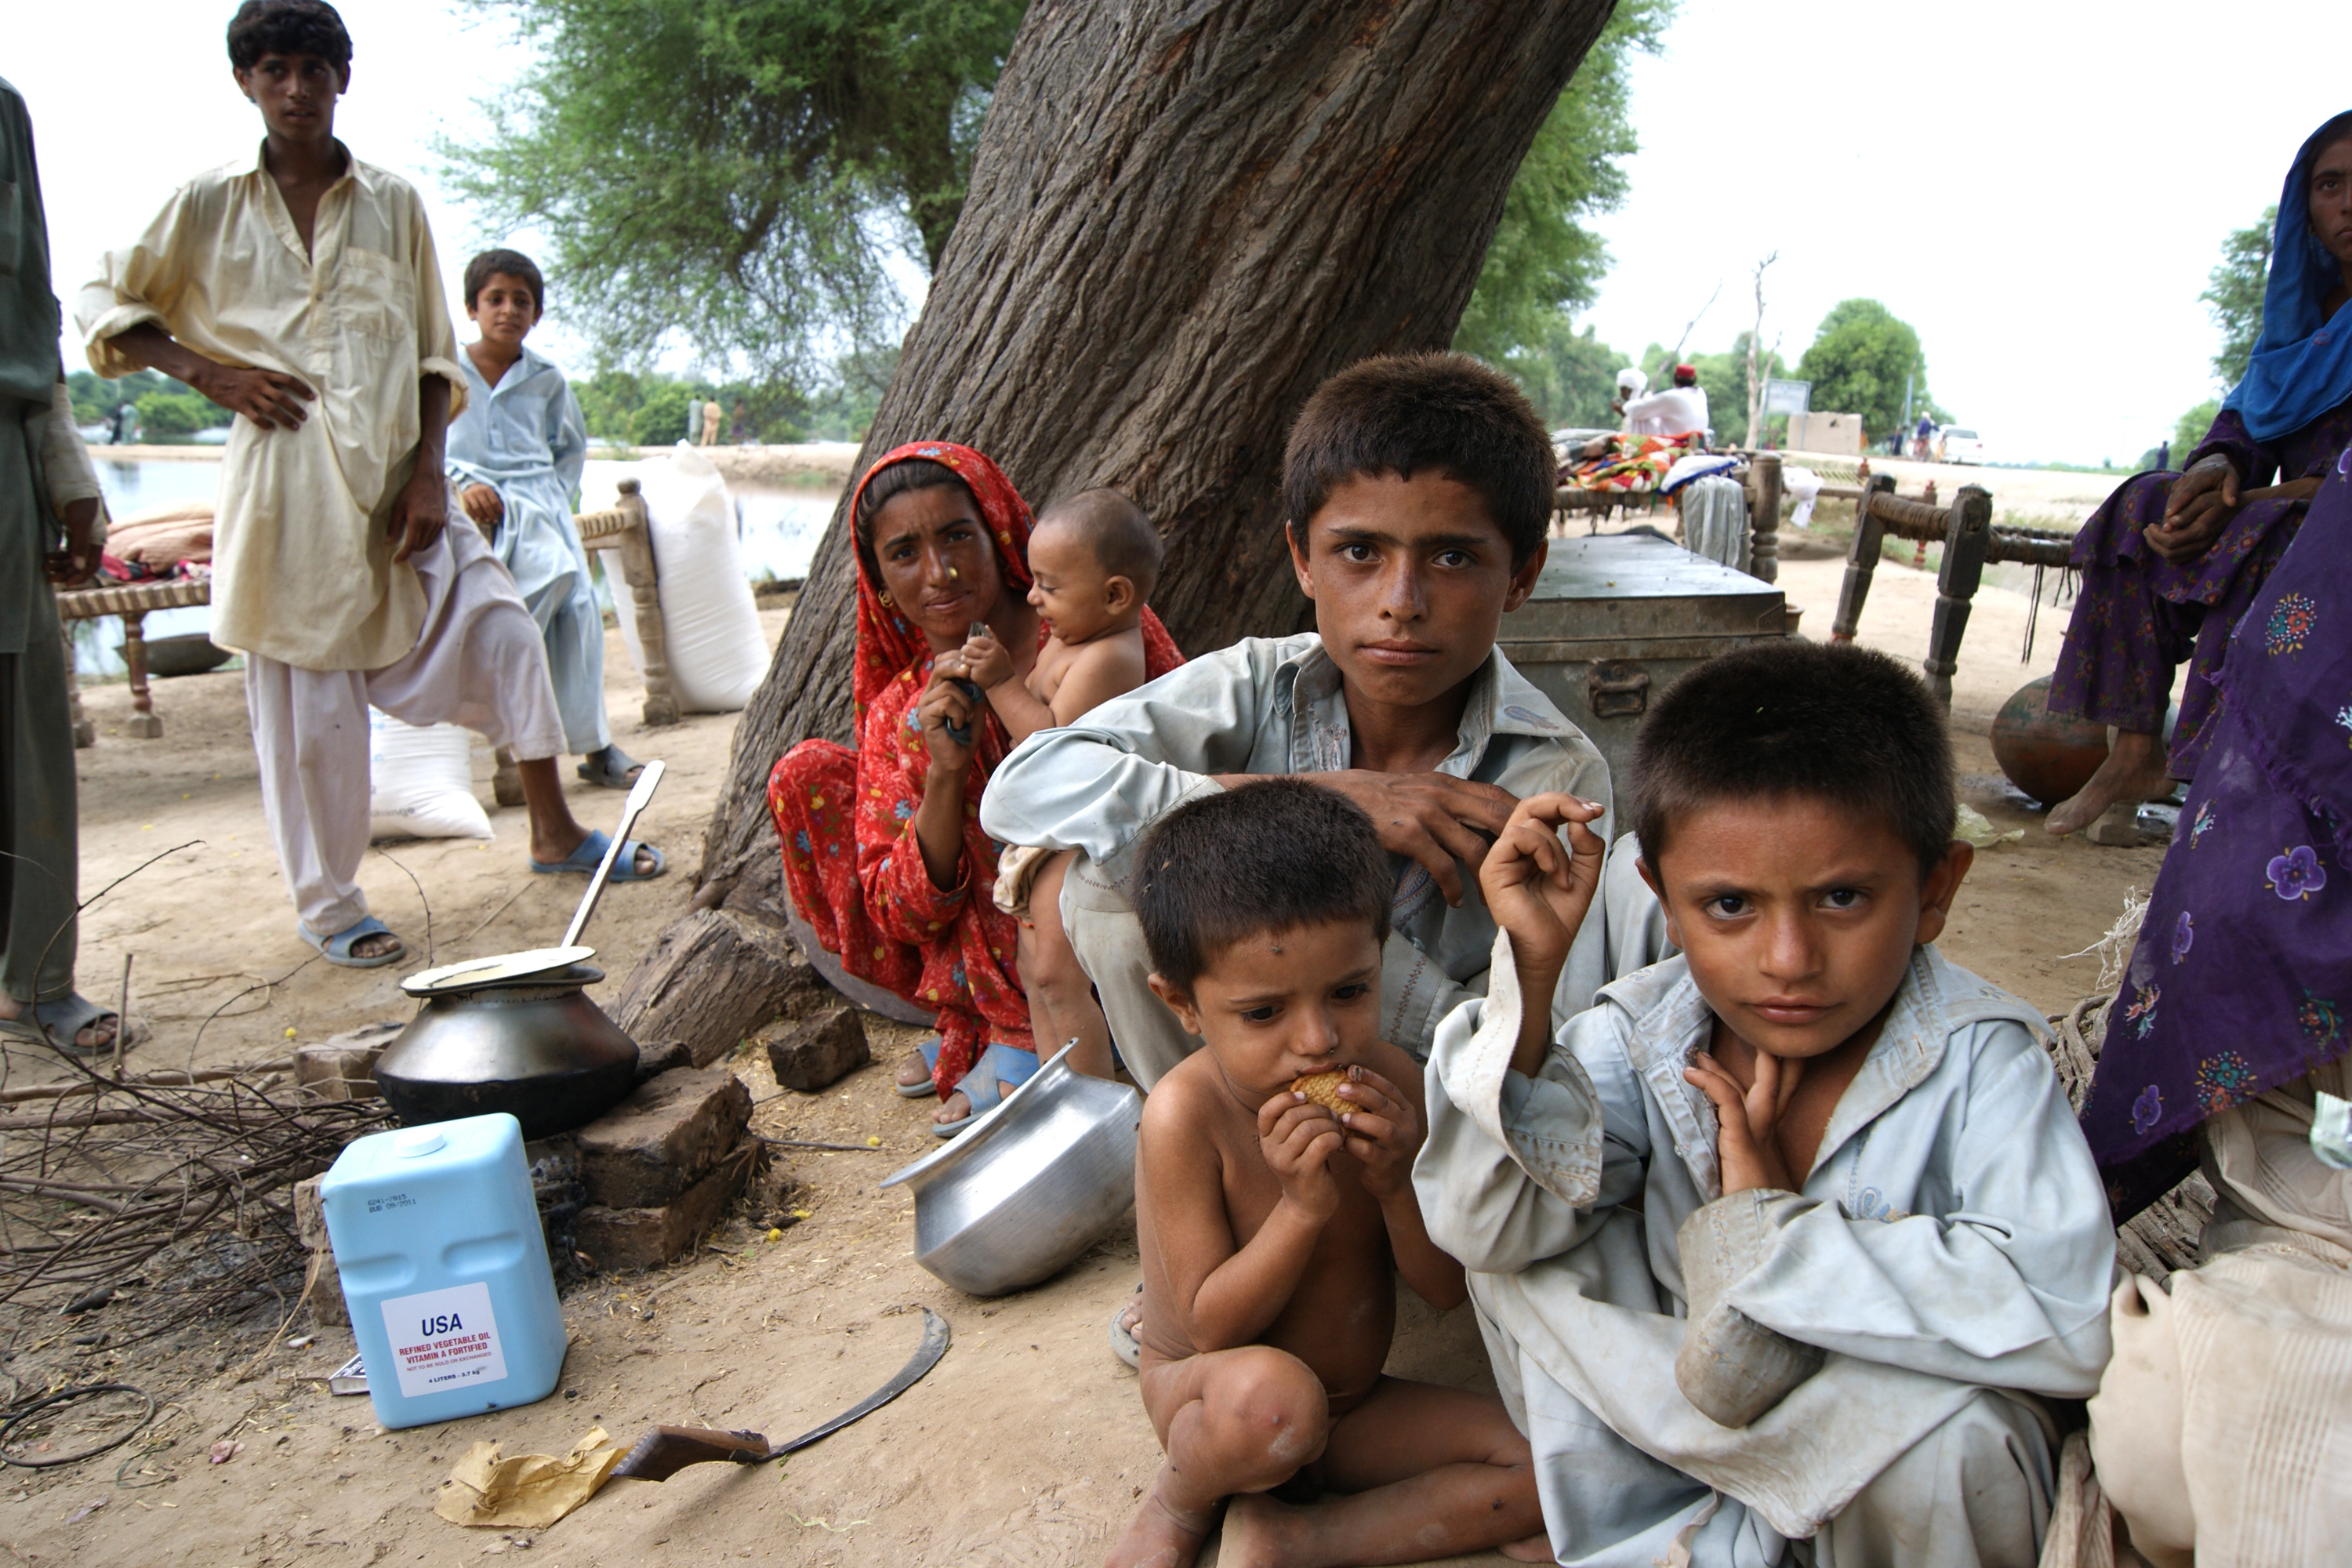 Flood victims in Pakistan receive rations from UN World Food Program.